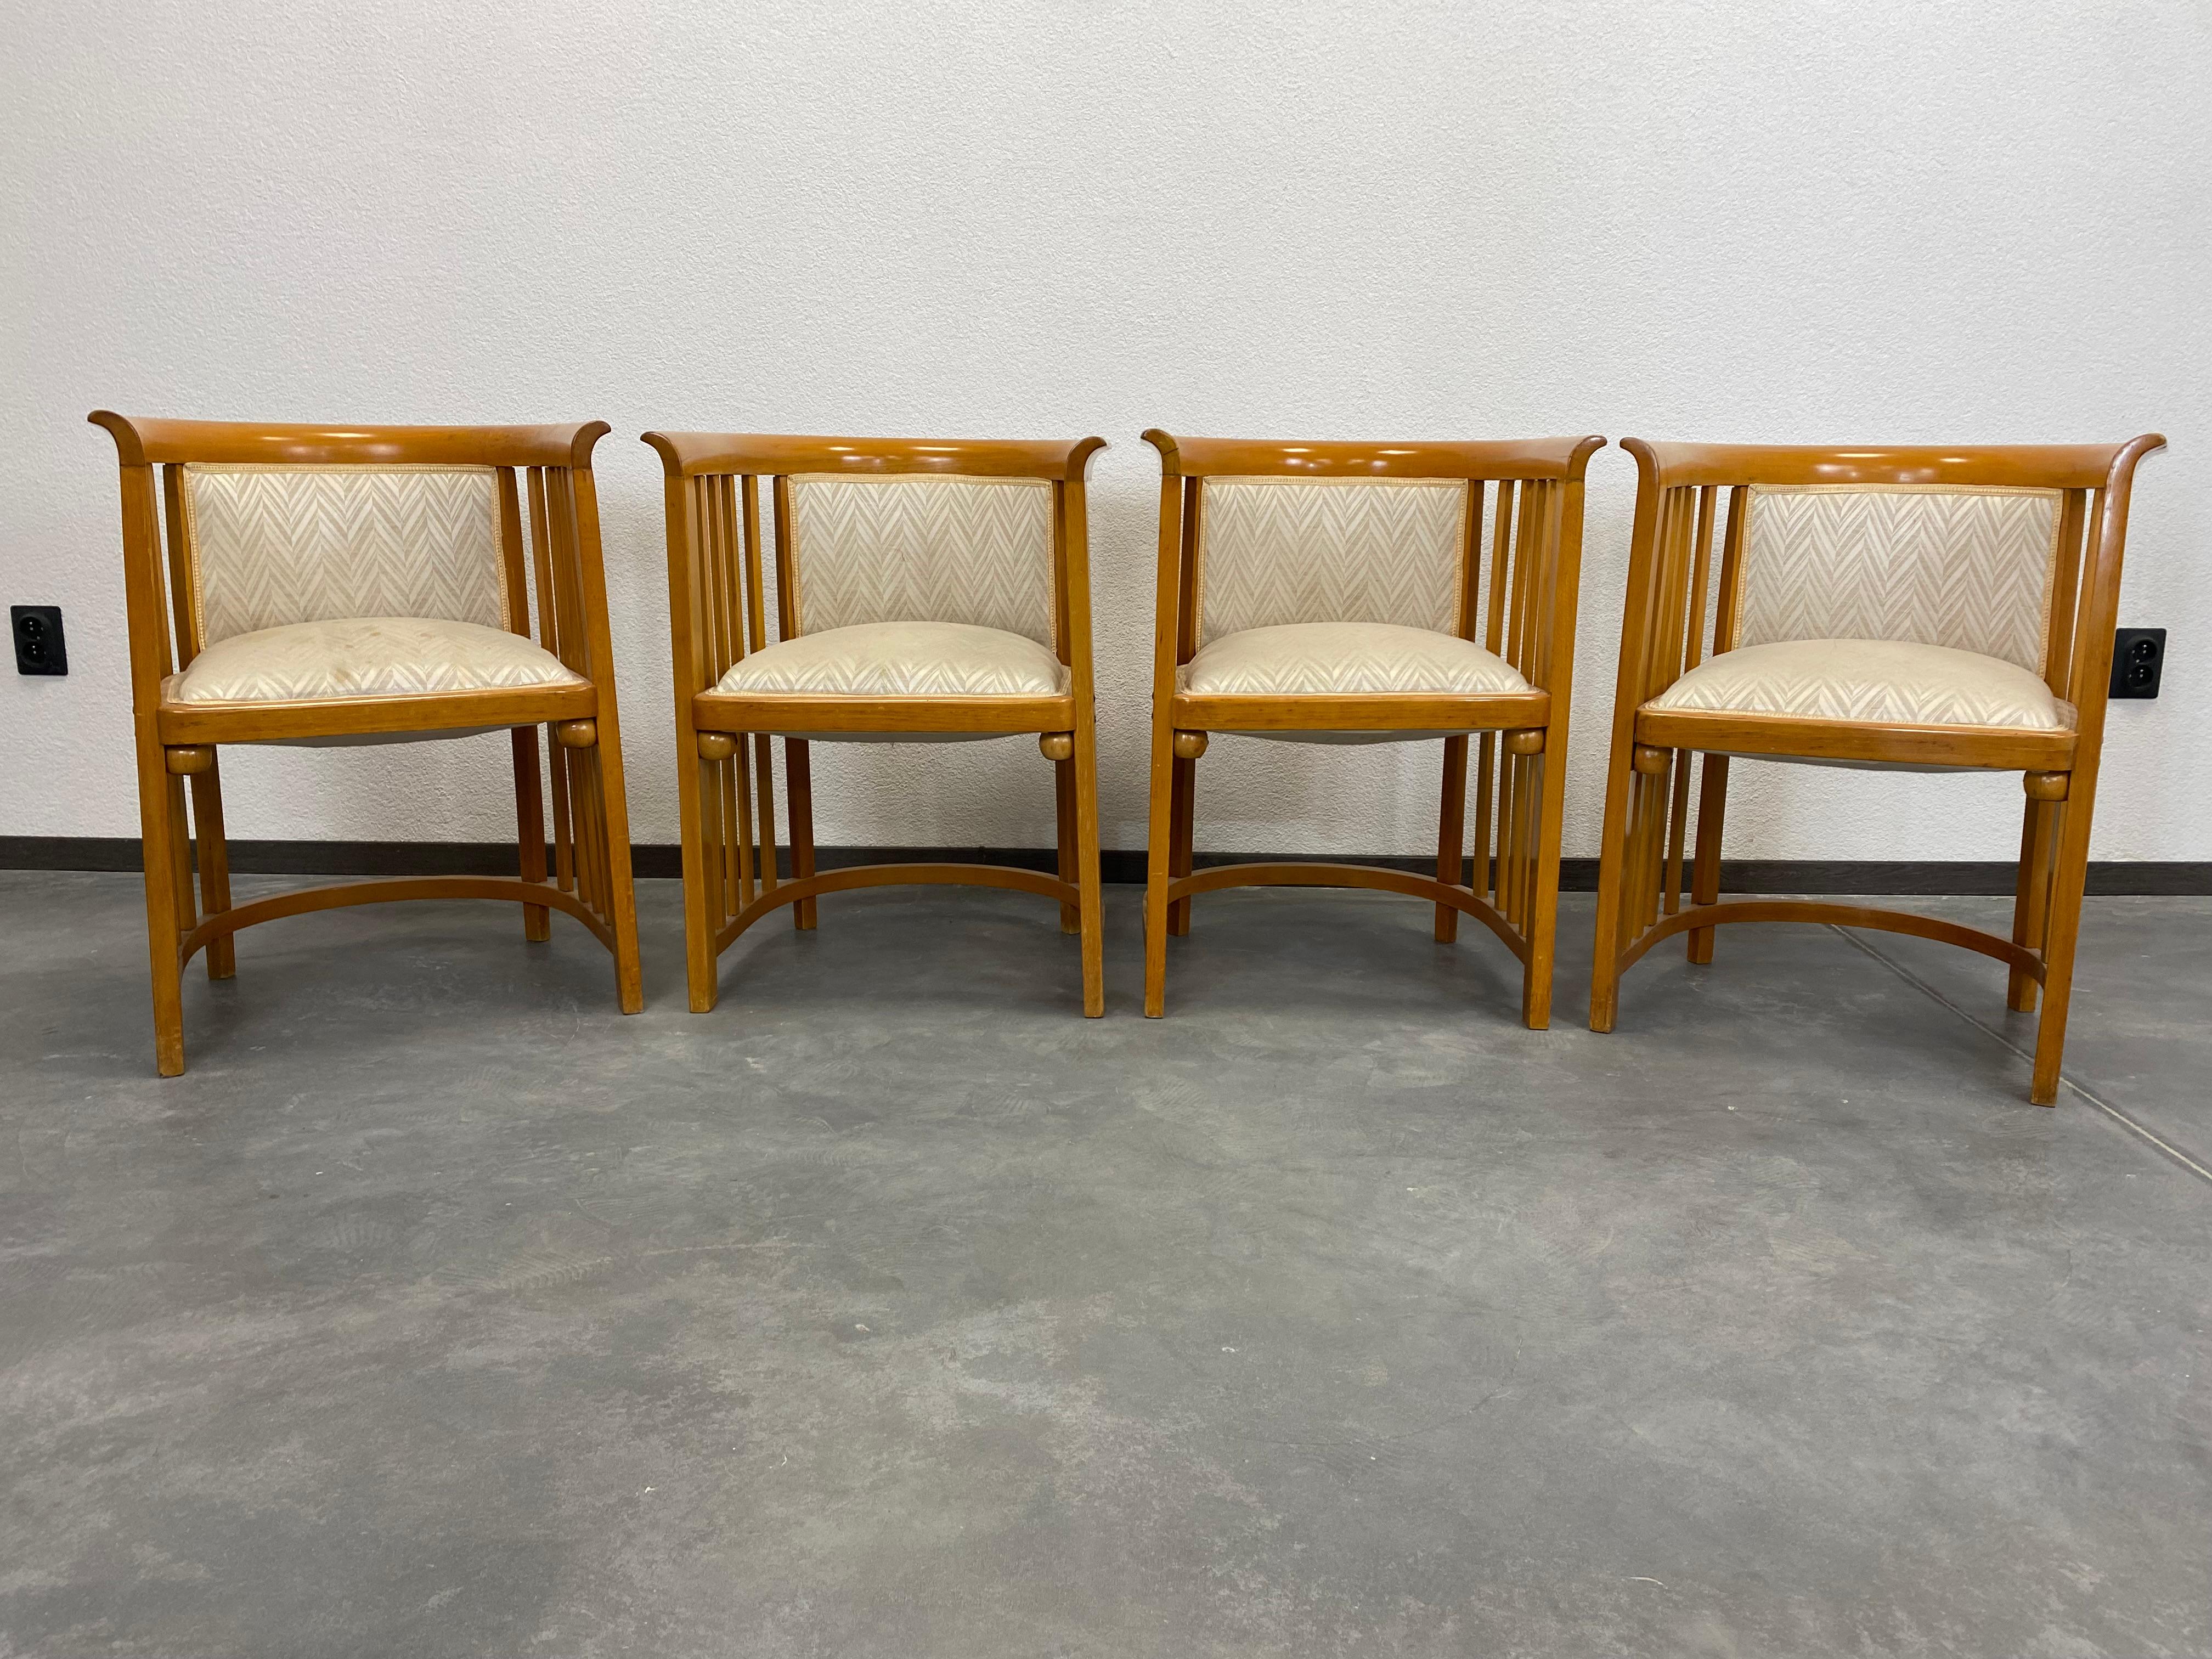 Fledermaus secession armchairs no.423 designed by Josef Hoffmann for the Fledermaus Cabaret in 1905. Made by J&J Kohn, beautiful original preservation, stains on two seats.